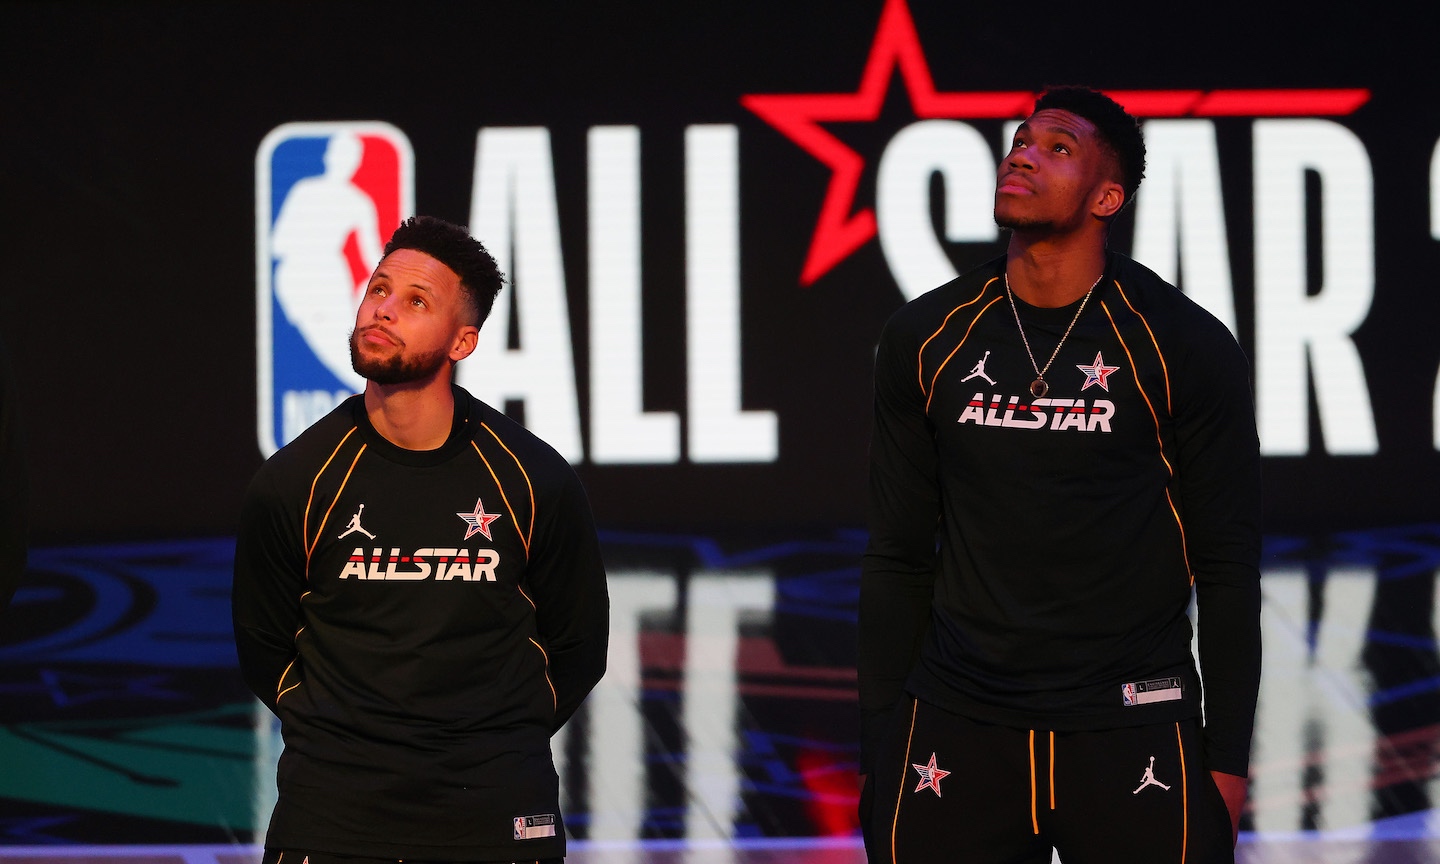 Jesser looks on during the Ruffles Celebrity Game as part of 2023 NBA  News Photo - Getty Images